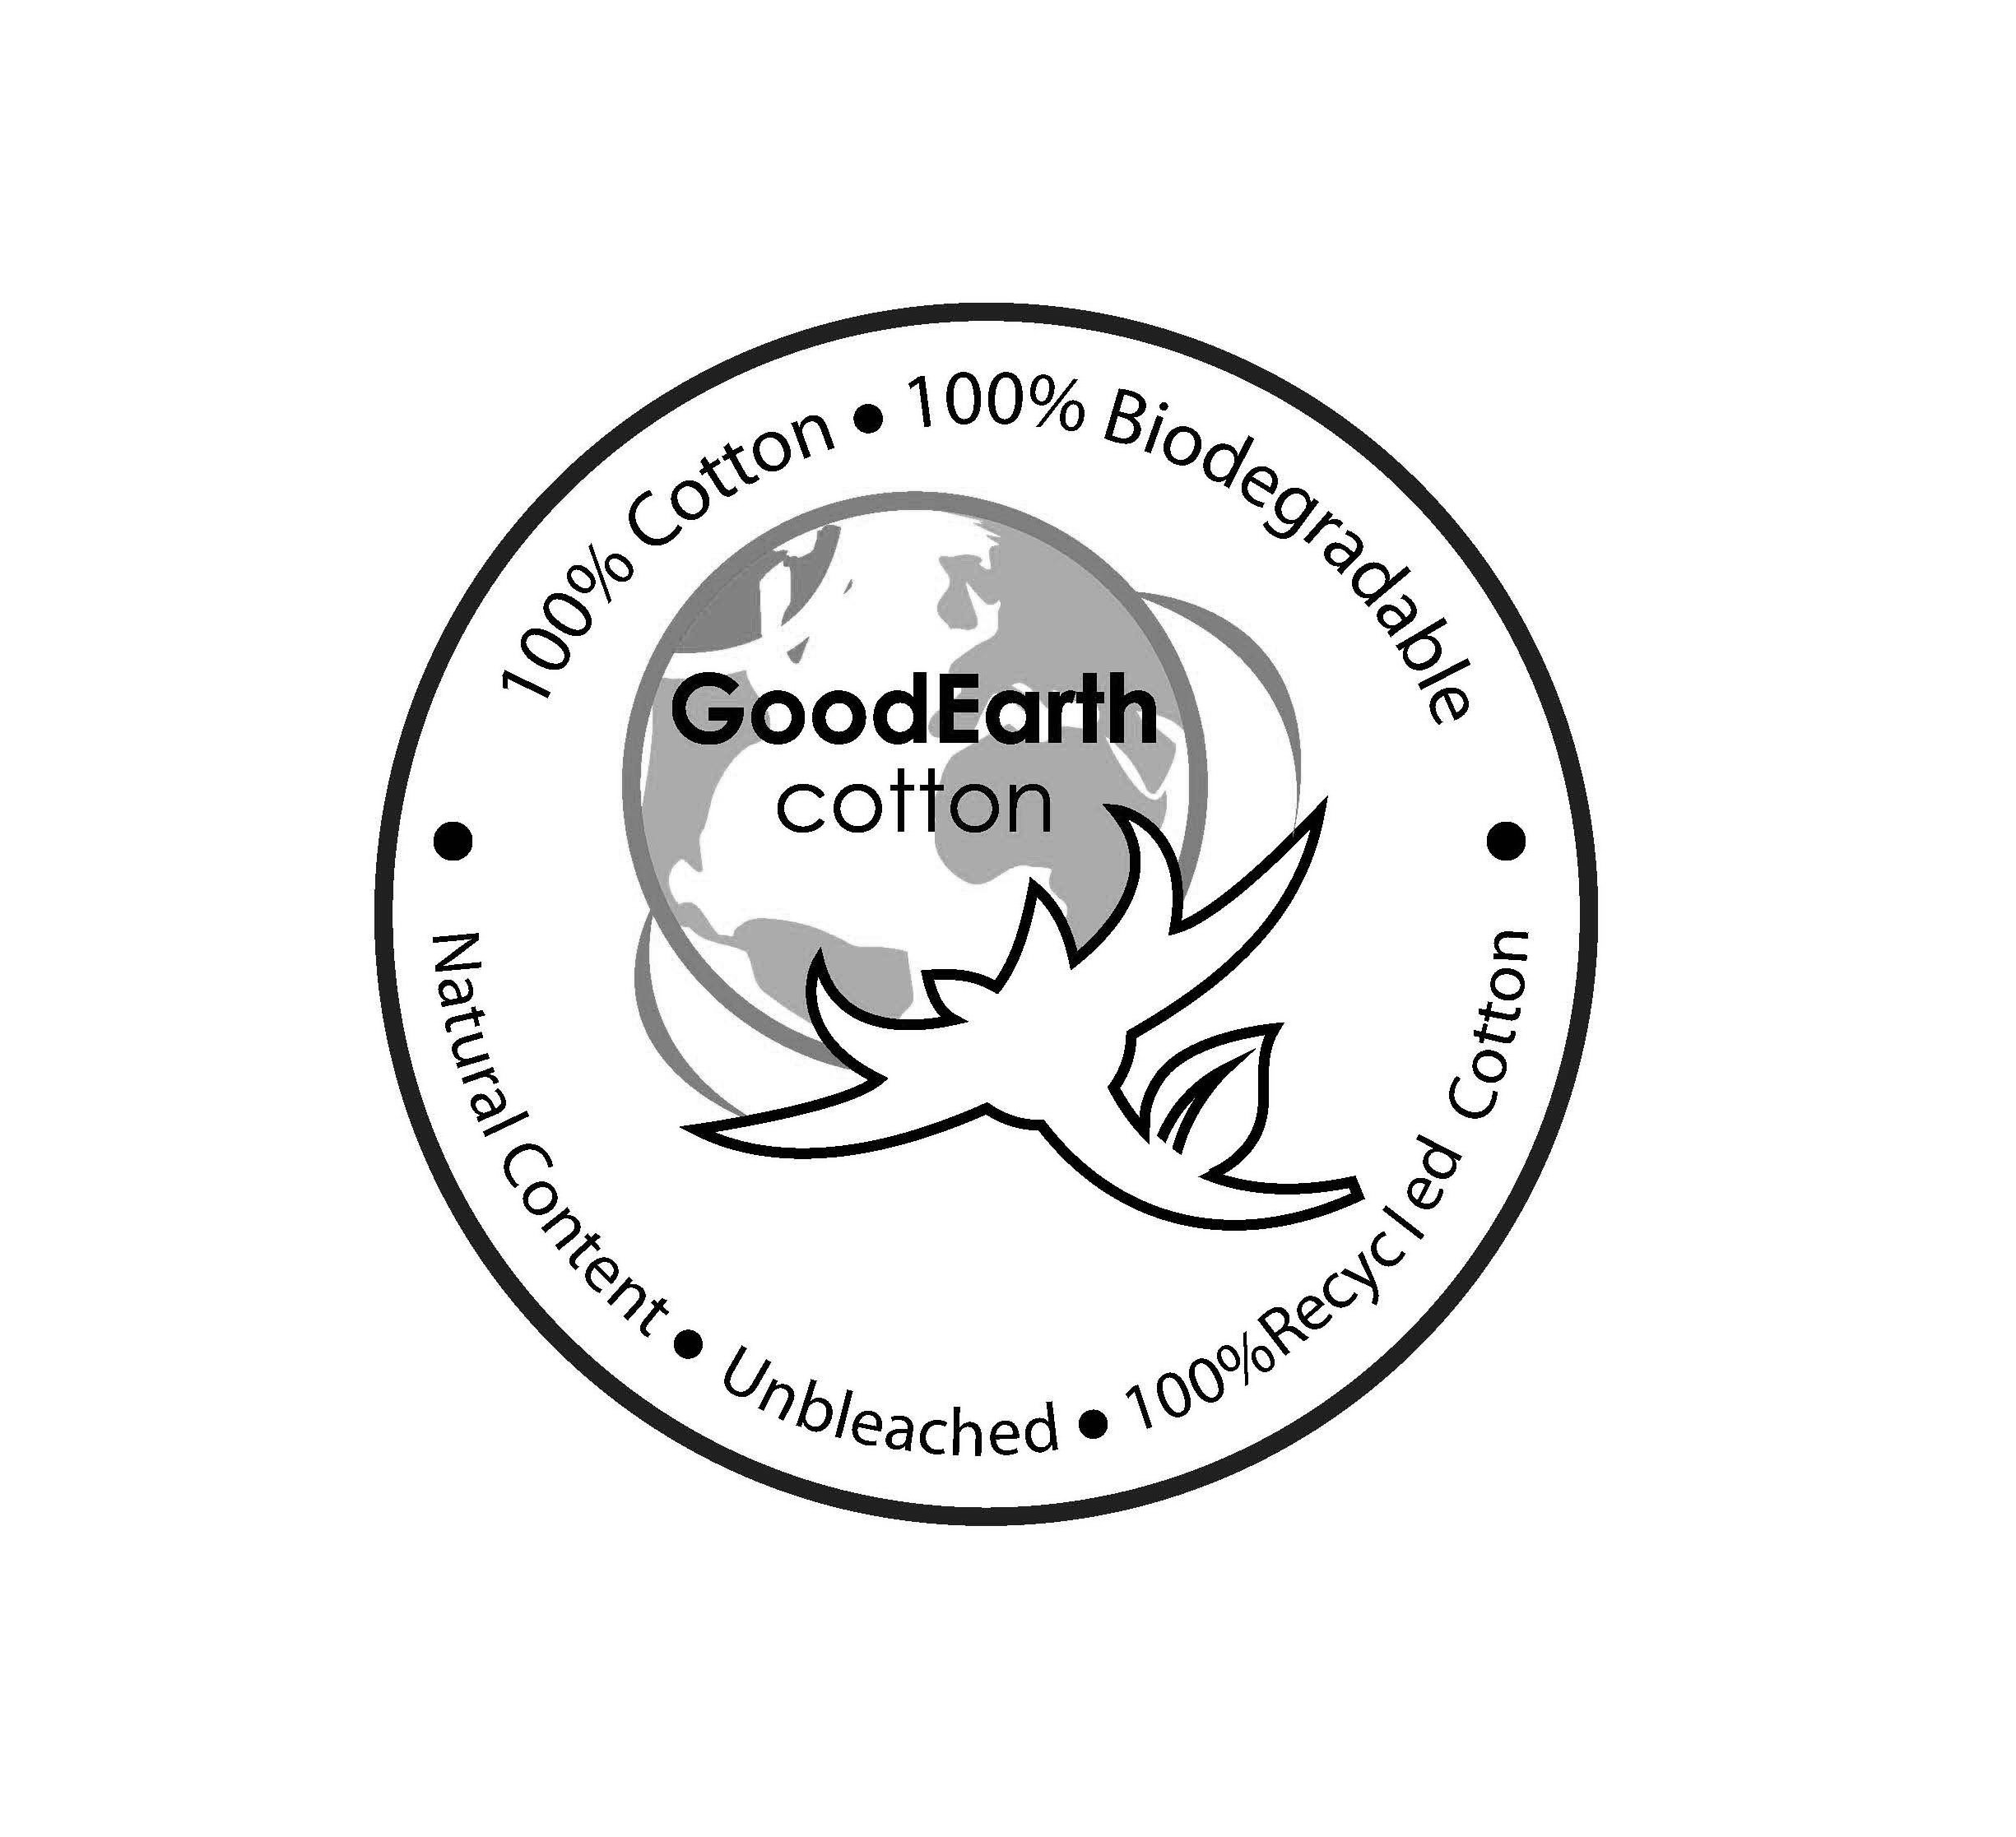  GOODEARTH COTTON · 100% COTTON · 100% BIODEGRADABLE · NATURAL CONTENT · UNBLEACHED · 100% RECYCLED COTTON